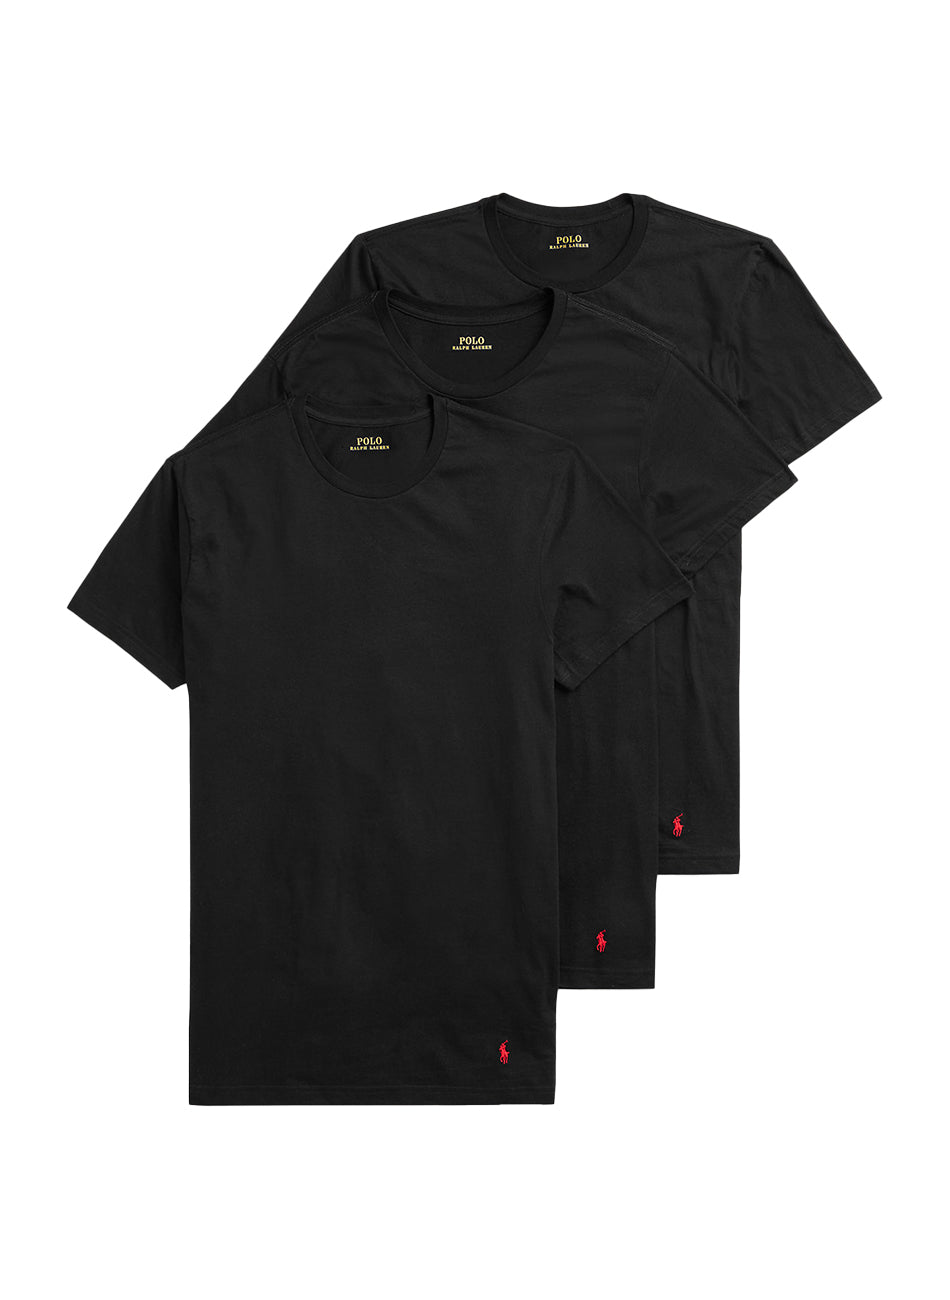 (NCCNP3-PBD) Classic Fit Cotton Crew T-Shirt 3 Pack - Black/Red PP